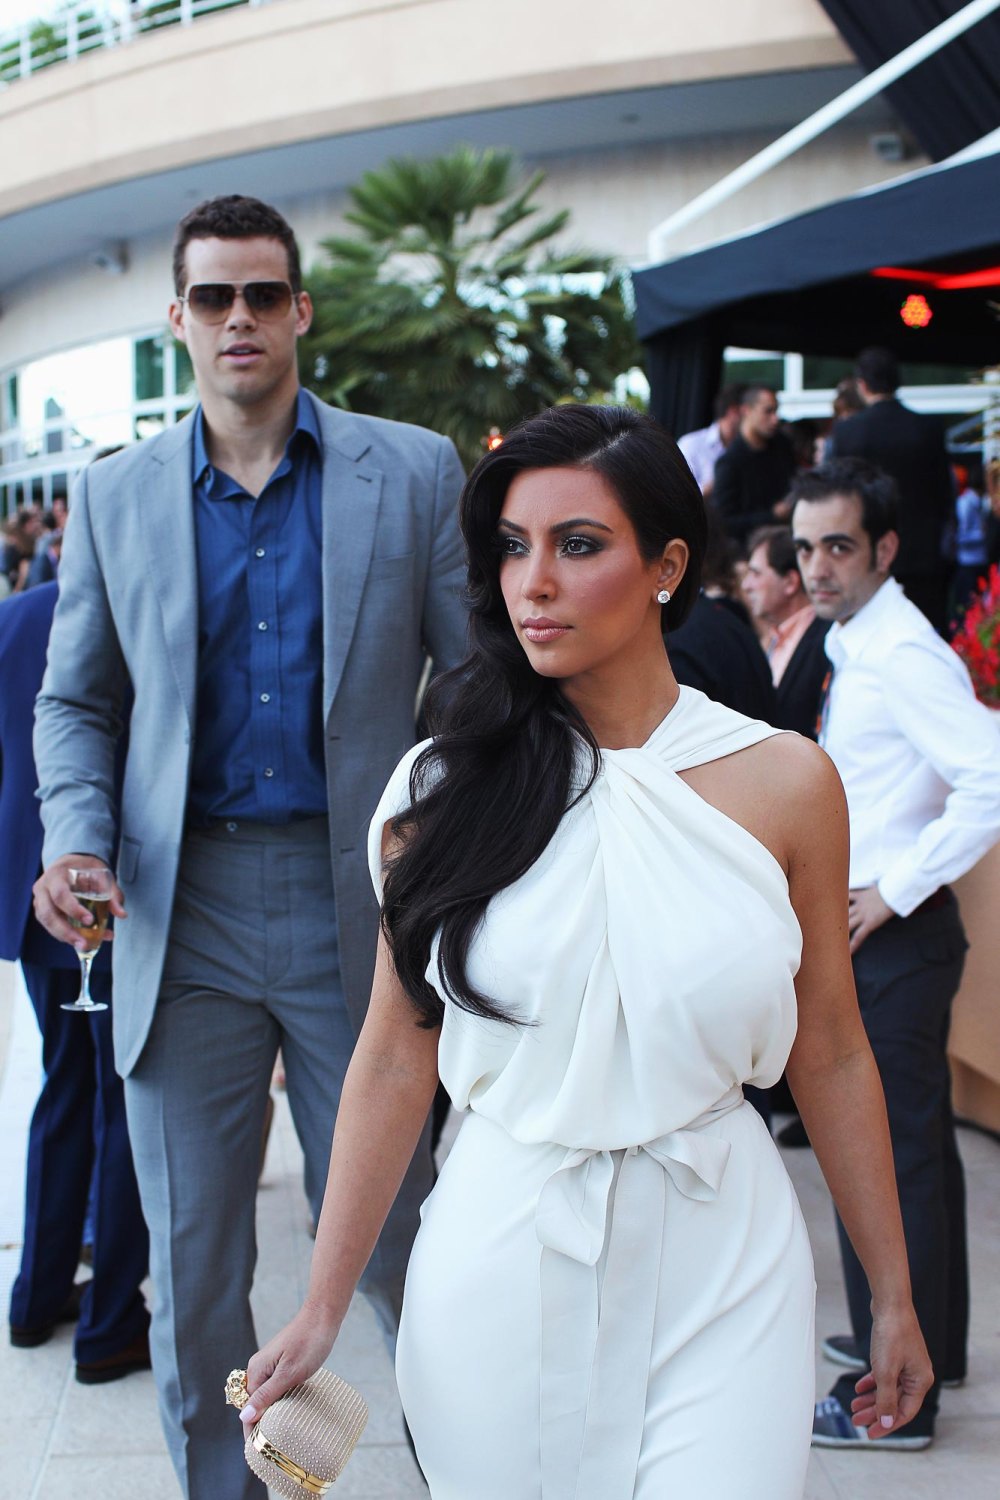 Gerry Turner and Theresa Nist Aren t Alone 11 Celebrity Couples Who Were Married Less Than 100 Days 667 Kim Kardashian and Kris Humphries